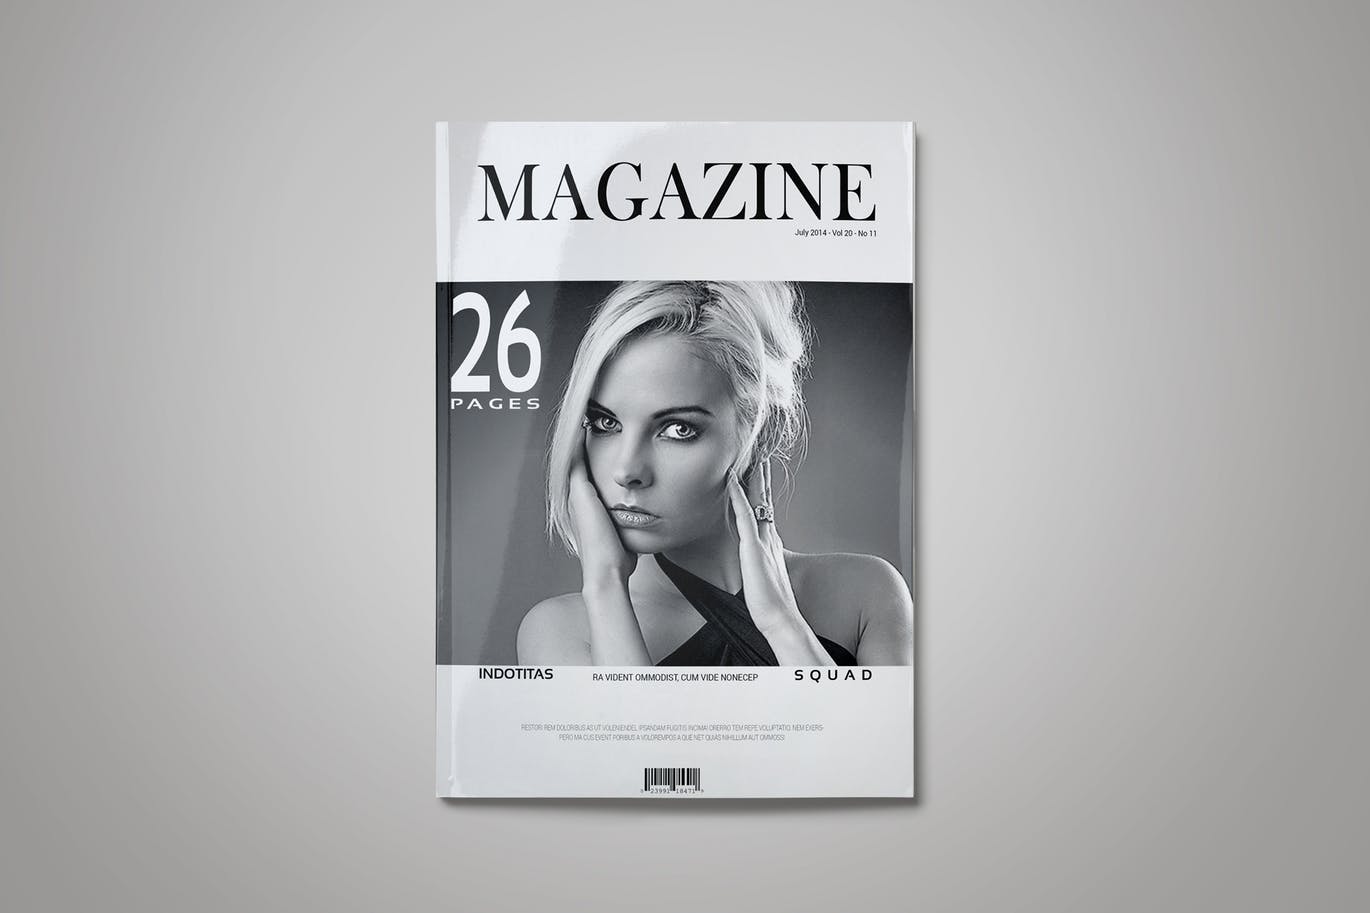 An indesign magazine template